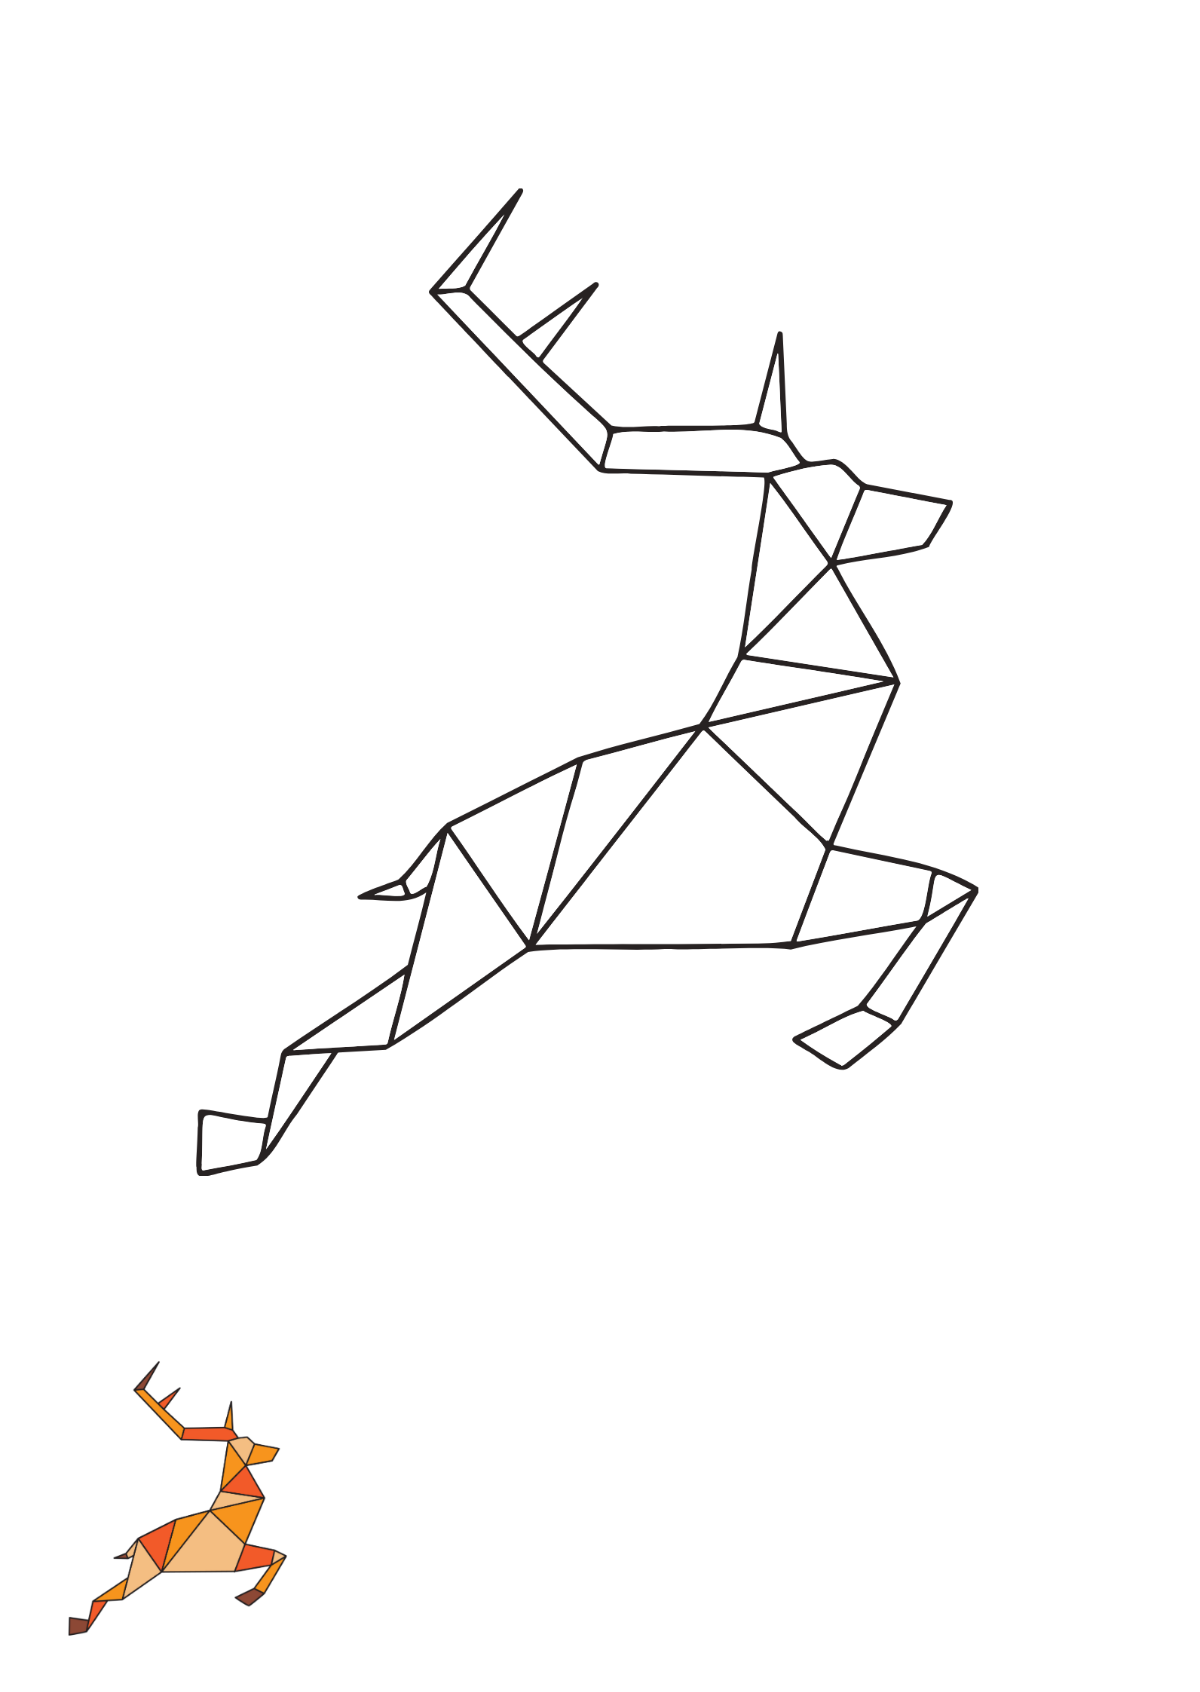 Origami Deer Coloring Page Template